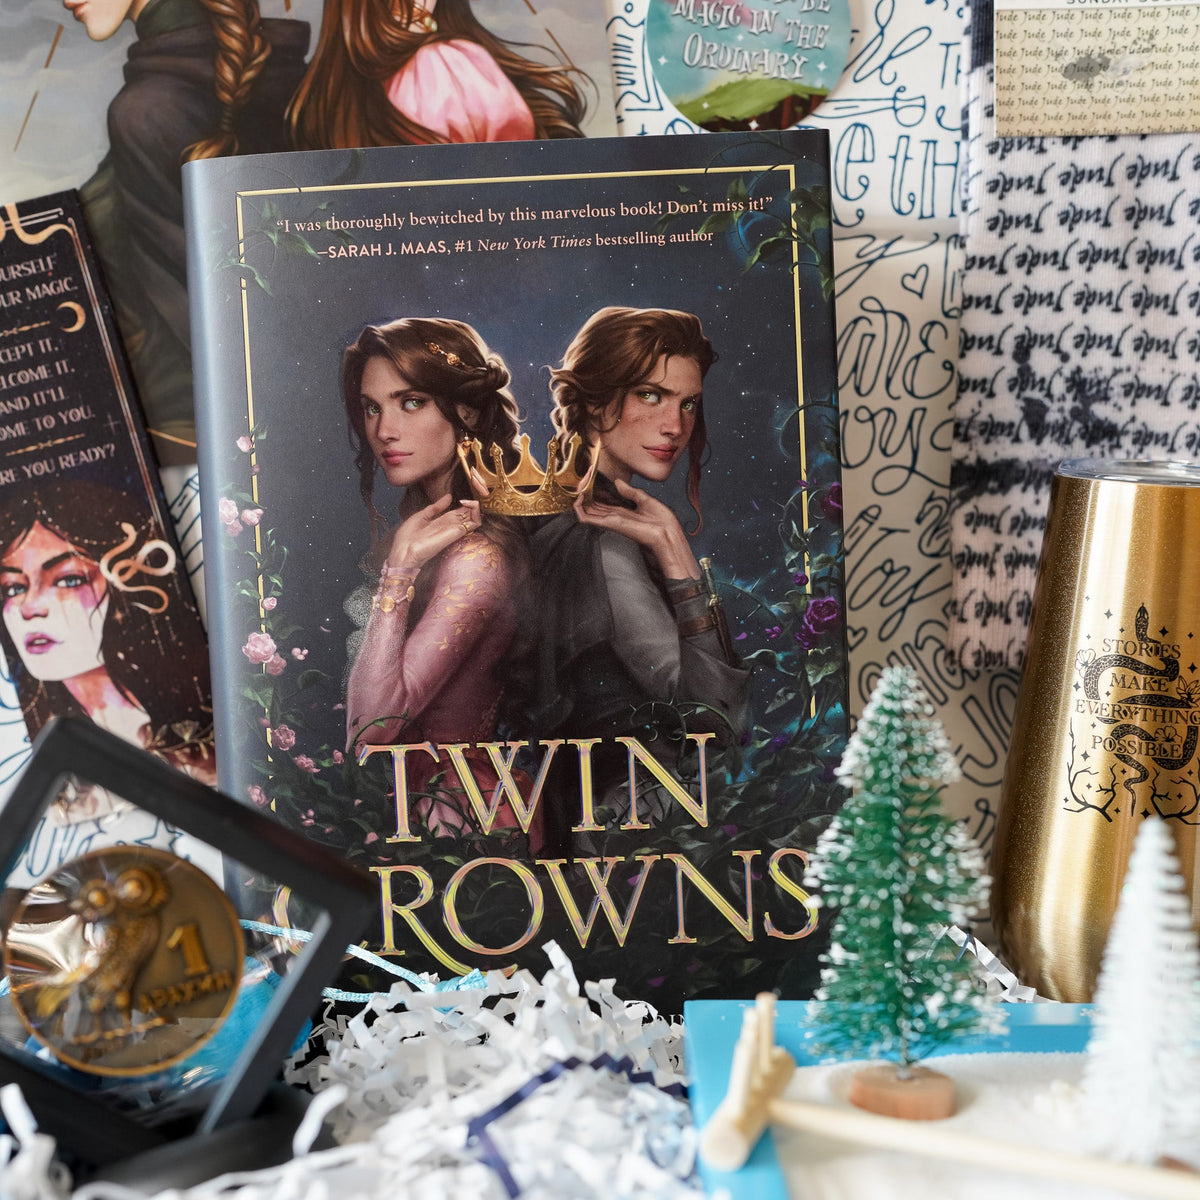 Magic Awakens Crate with Twin Crowns, the book cover shows two princesses back to back with their hands on the same crown